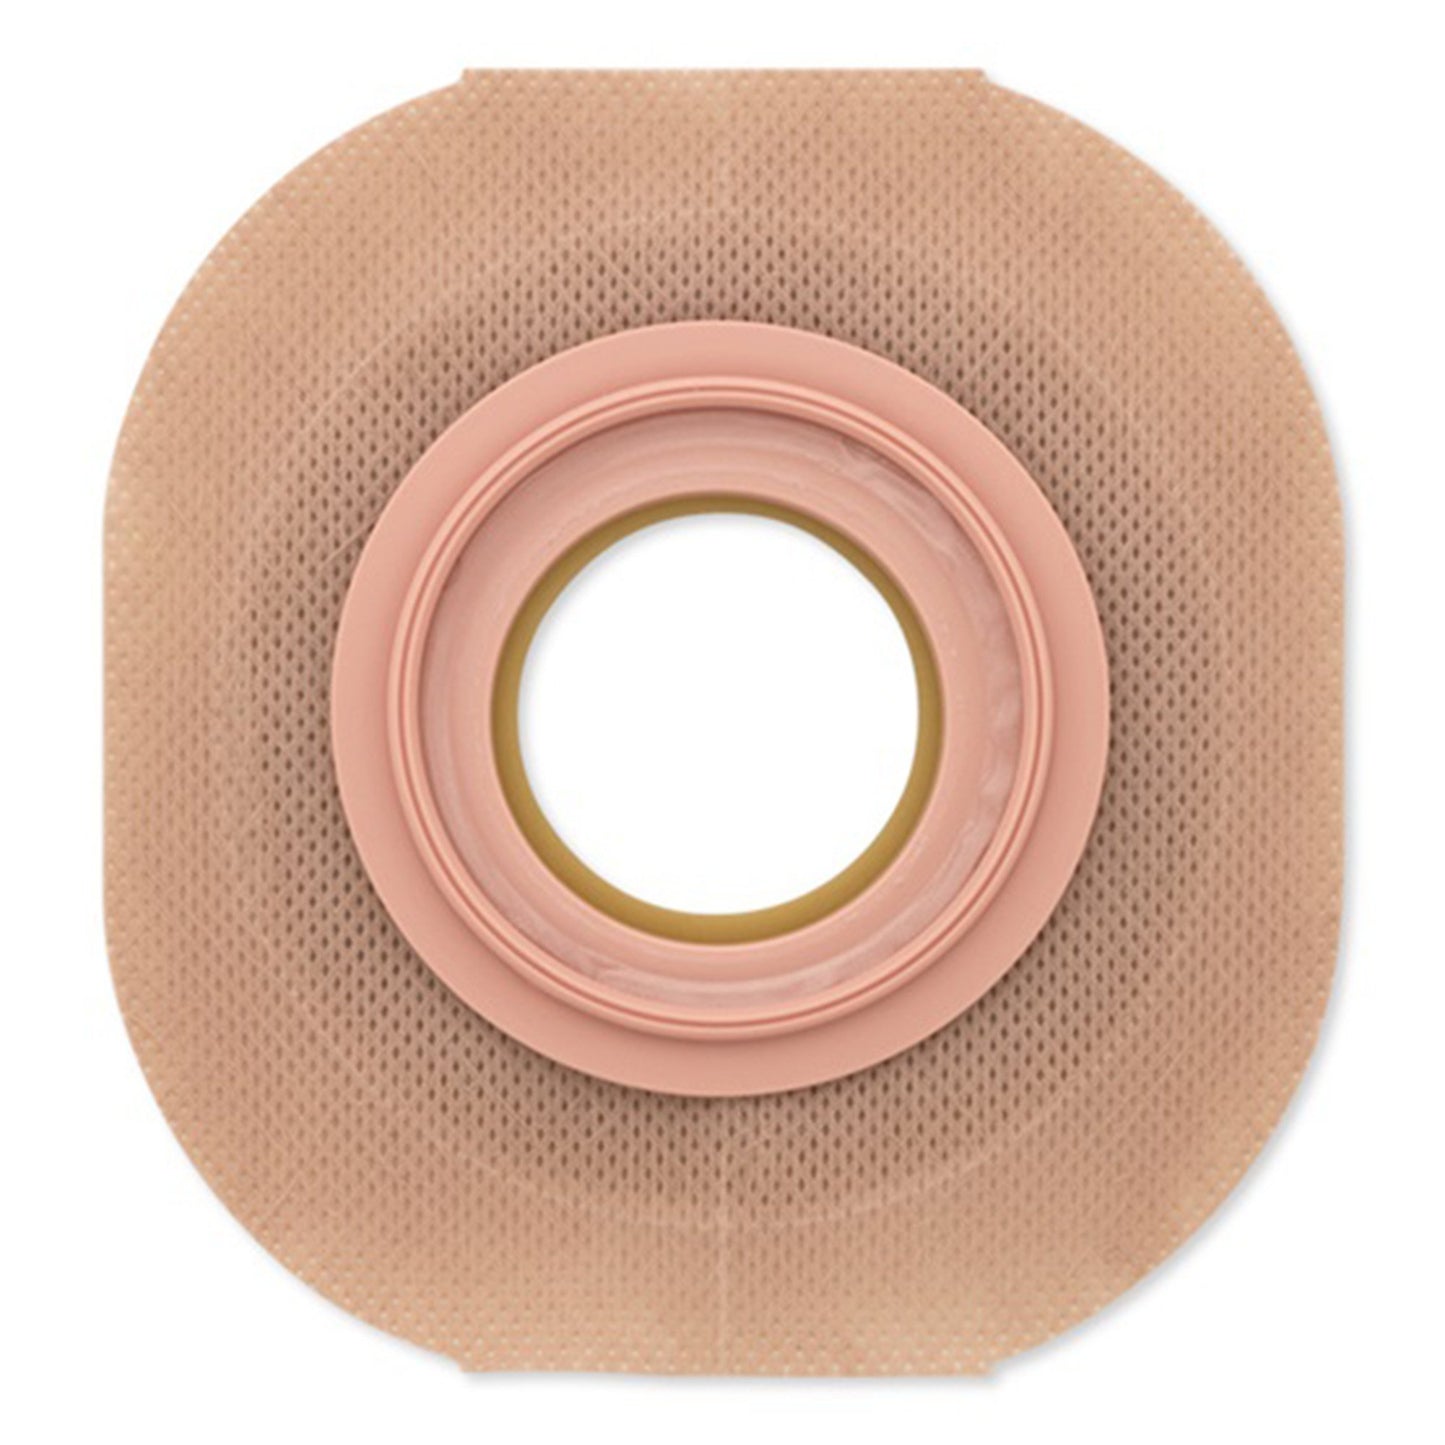 New Image™ Flextend™ Skin Barrier With 1.5 Inch Stoma Opening, 5 ct